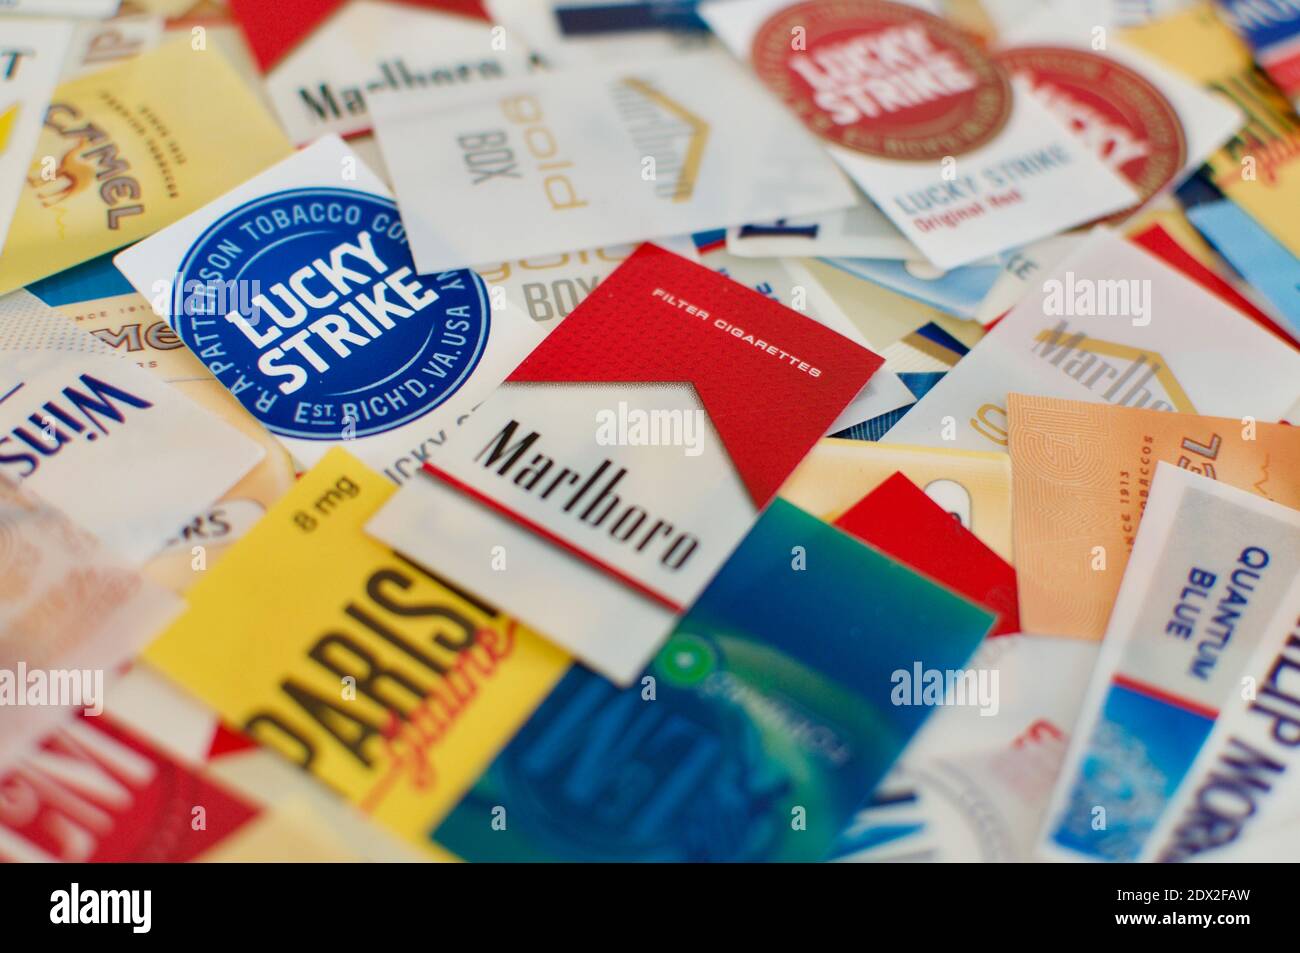 Cadro, Ticino, Switzerland - 28th November 2020 : Cigarettes tags flat lay of many different brands Stock Photo